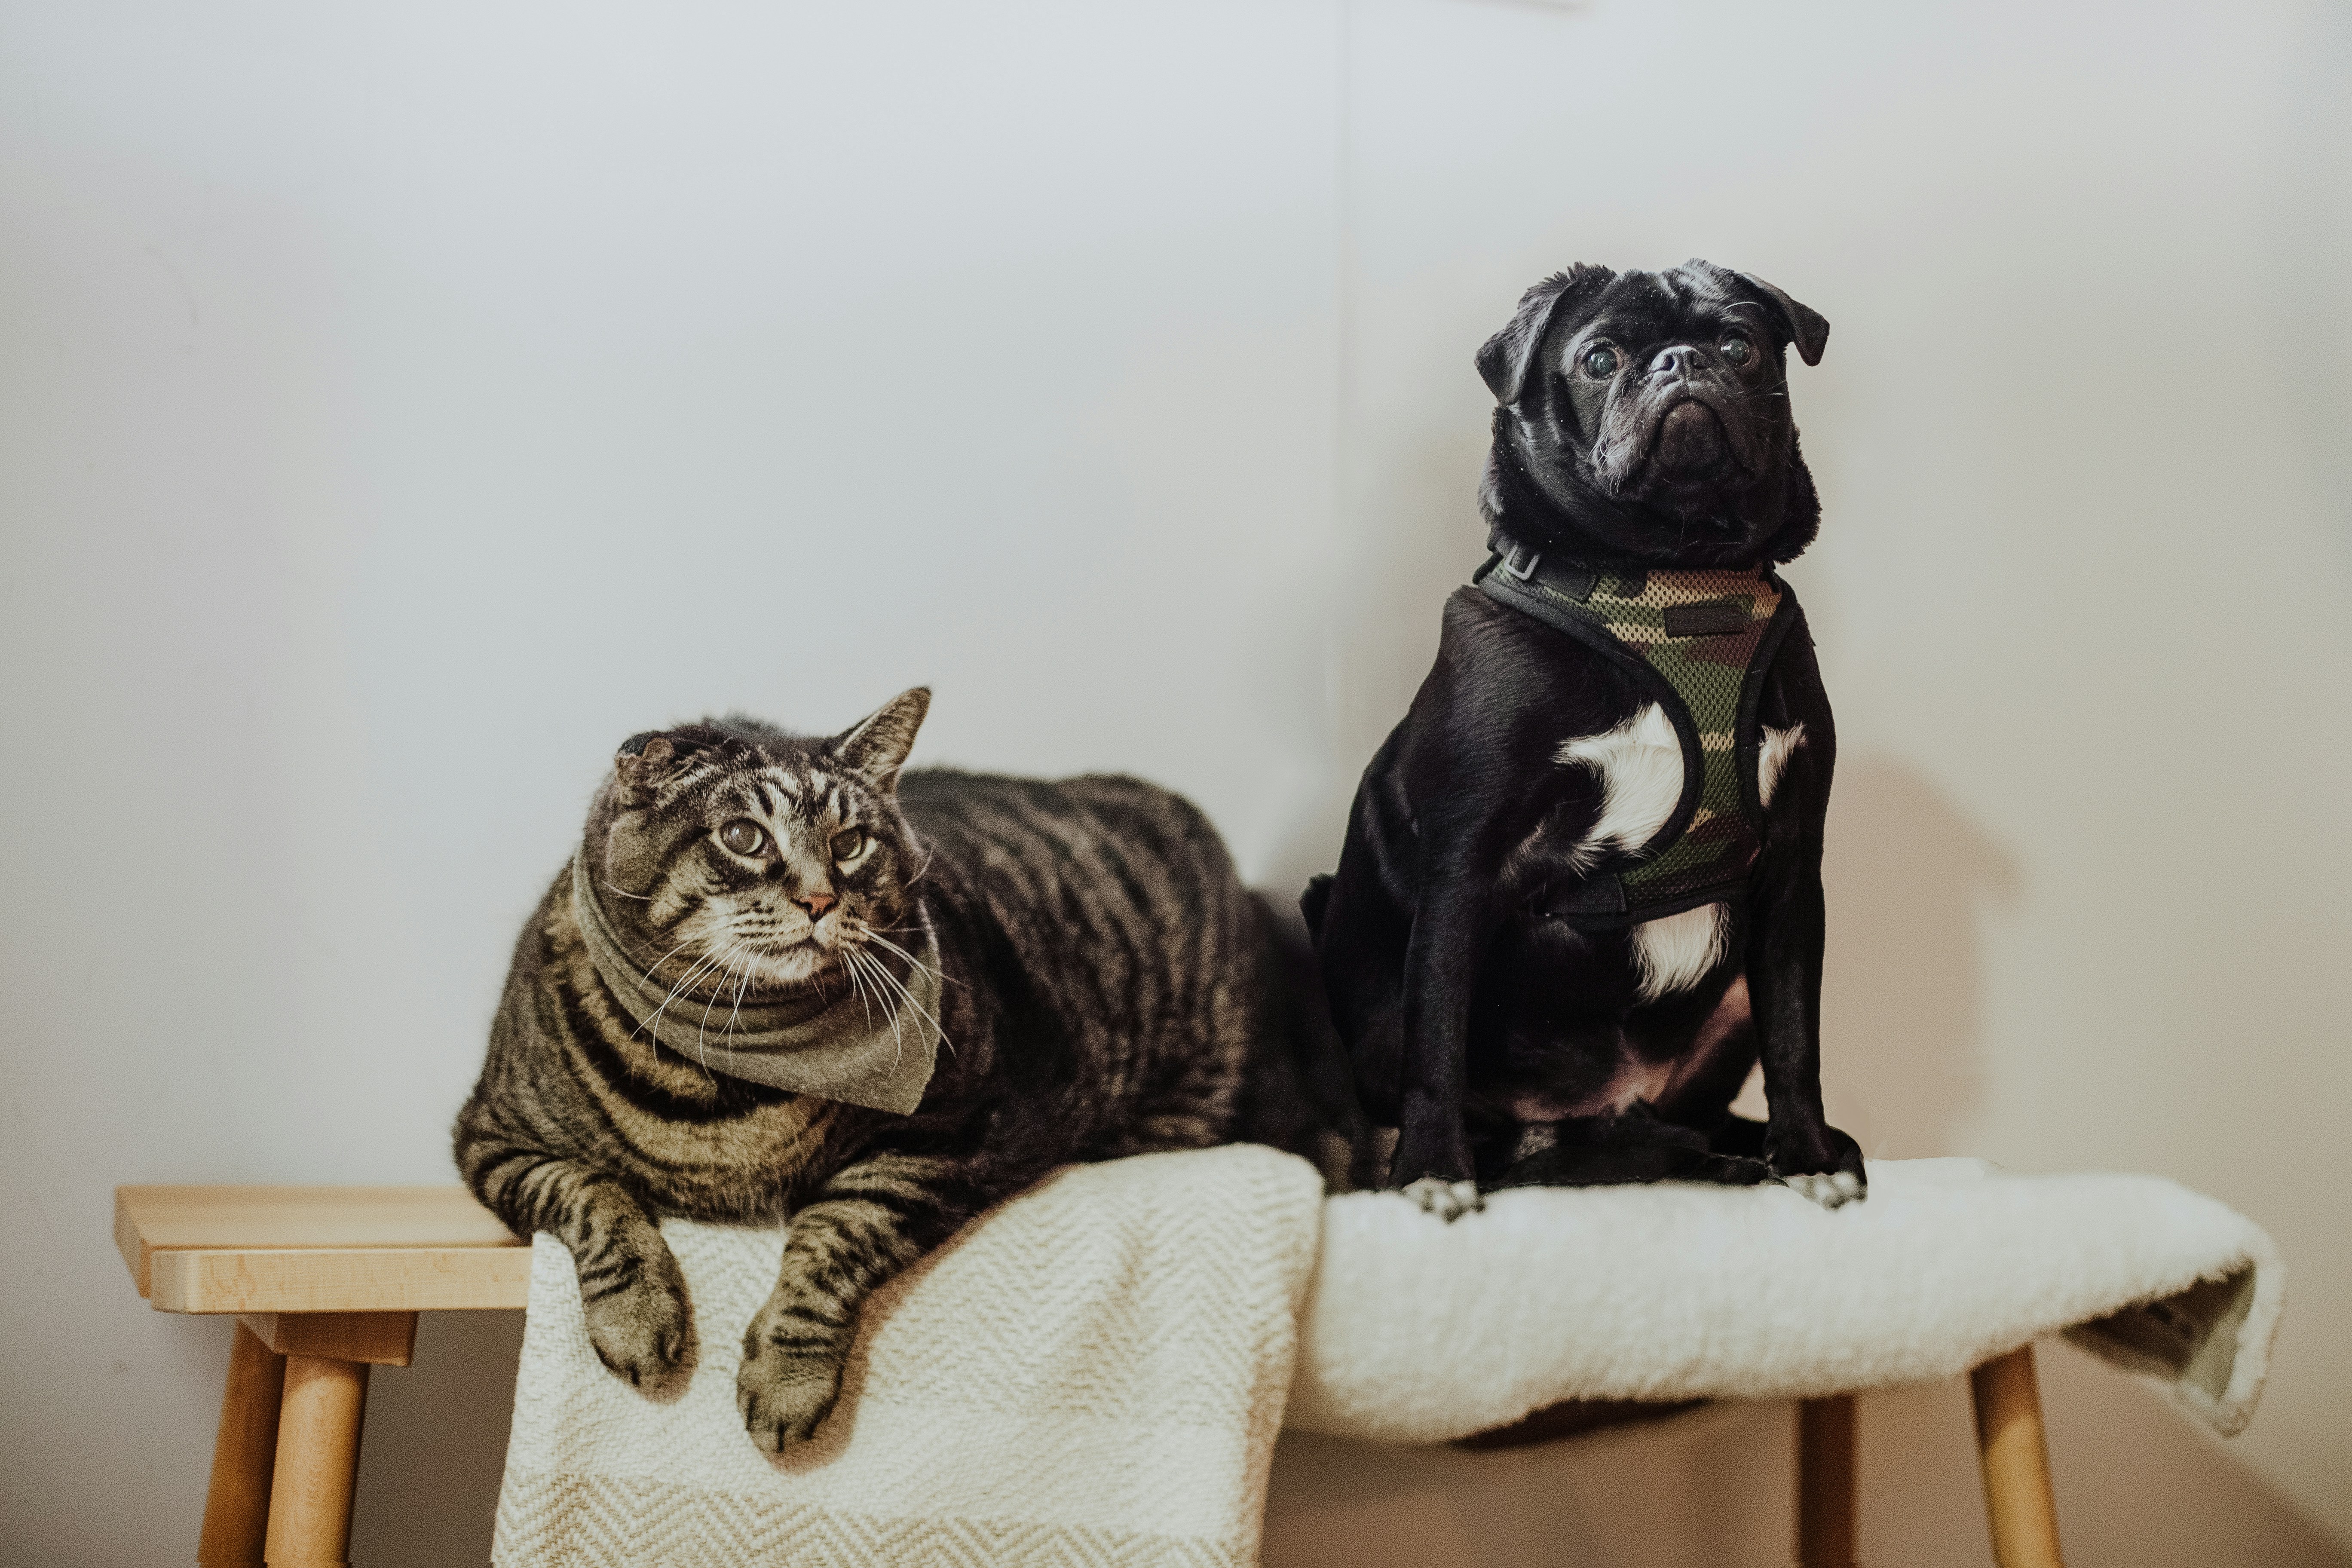 Fat tabby cat and black pug on a bench with white towels.